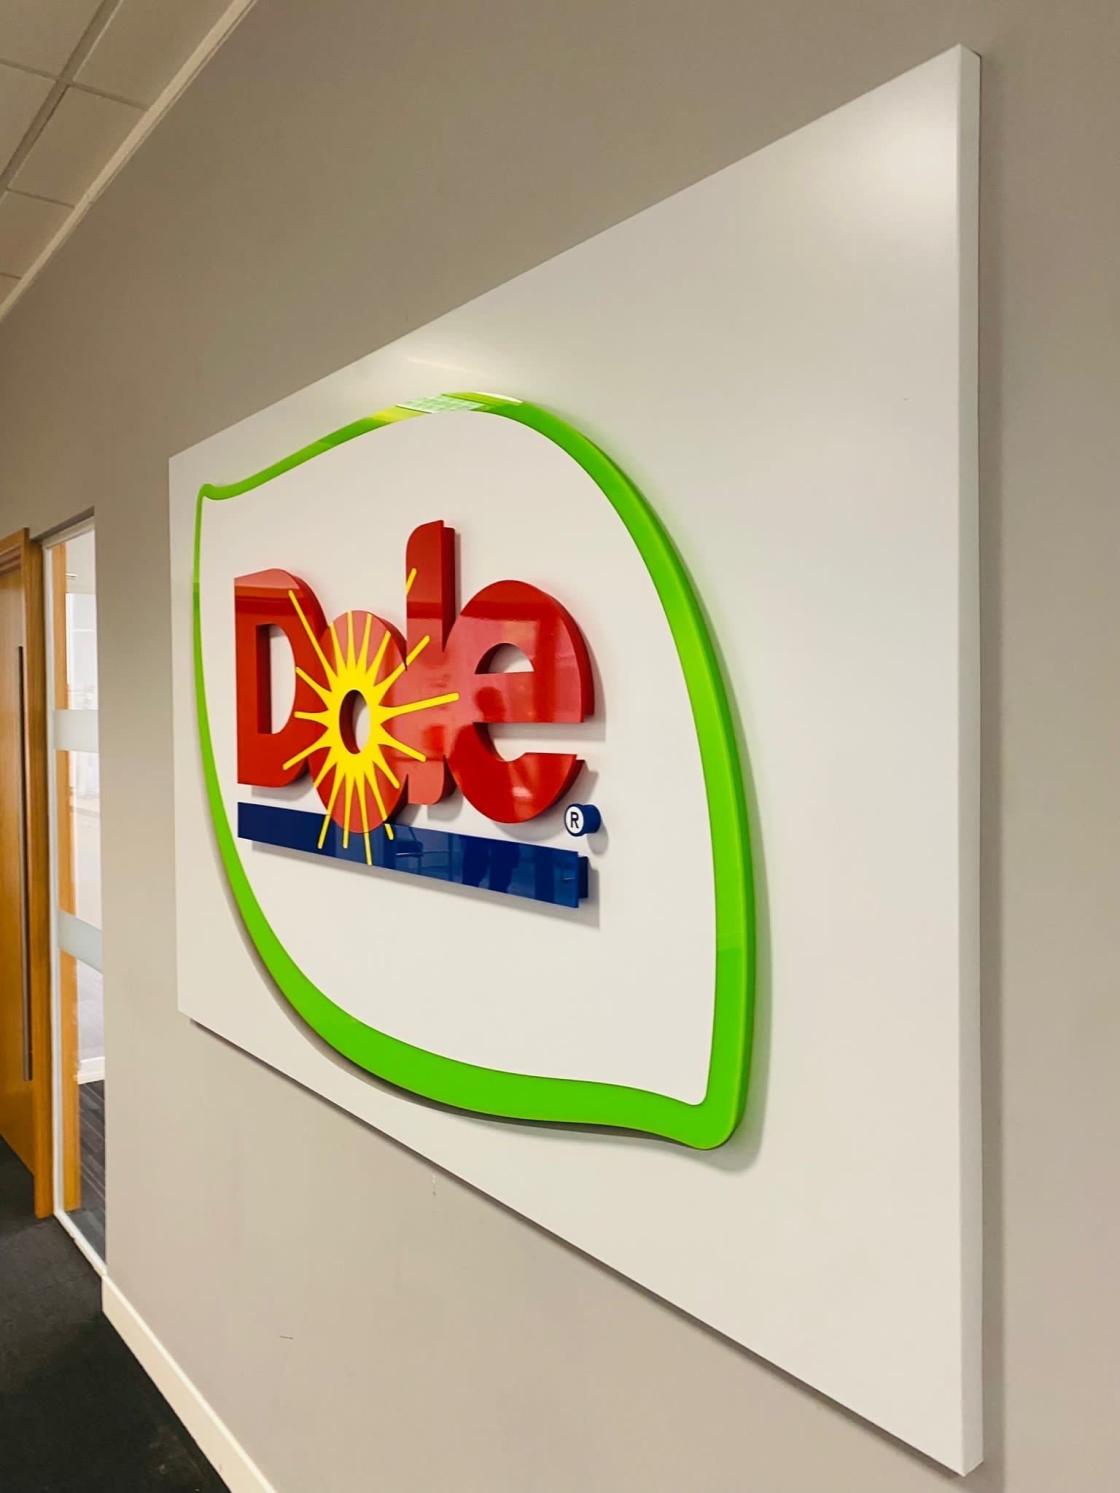 Dole office sign